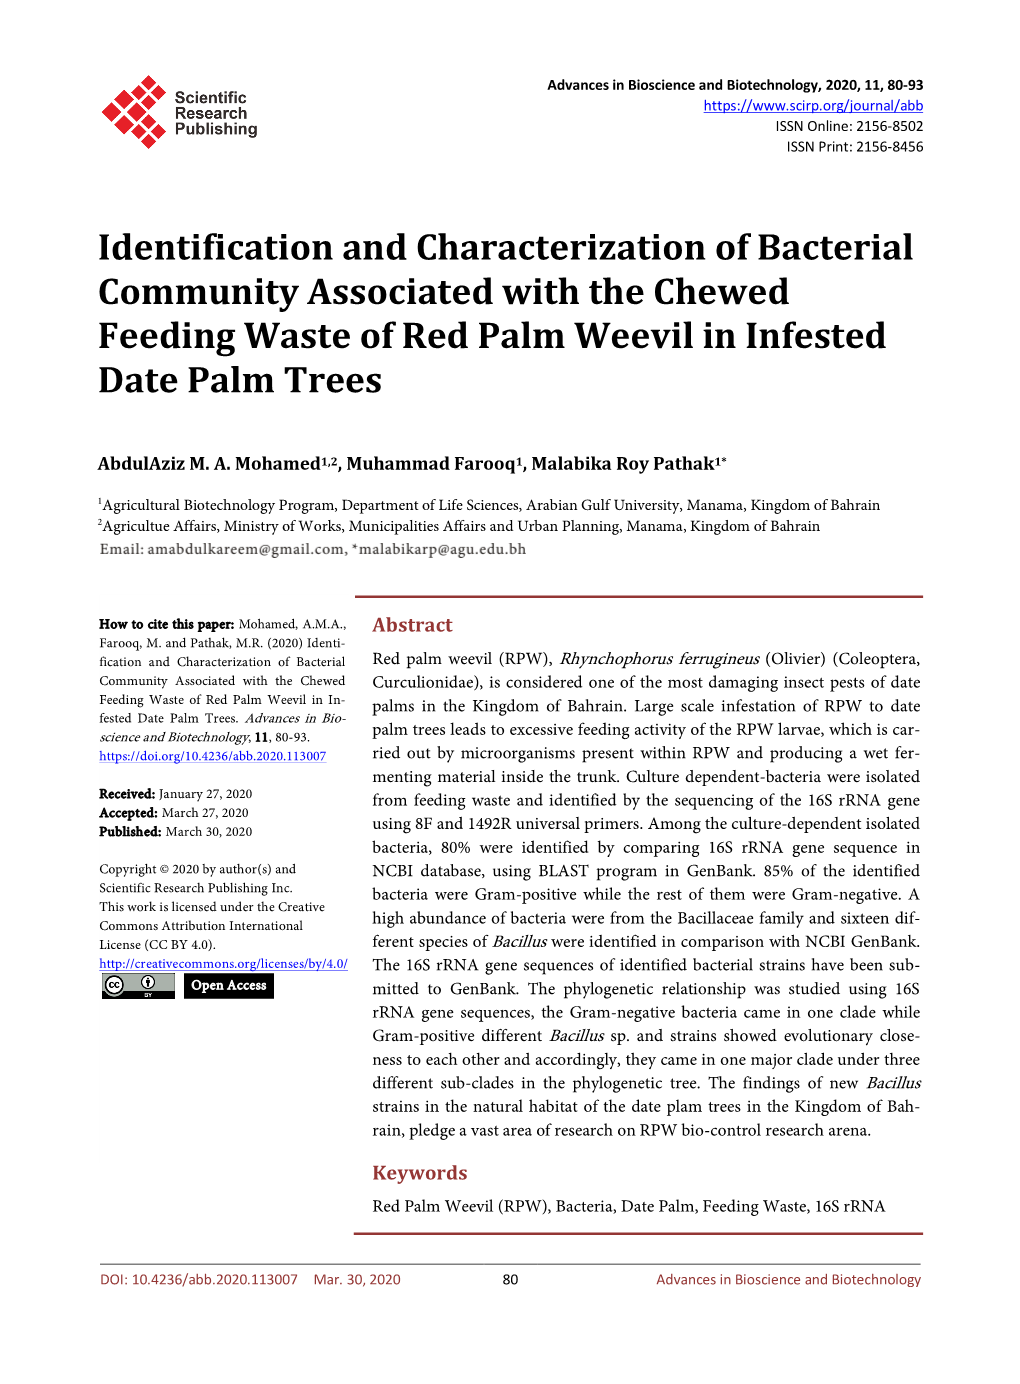 Identification and Characterization of Bacterial Community Associated with the Chewed Feeding Waste of Red Palm Weevil in Infested Date Palm Trees